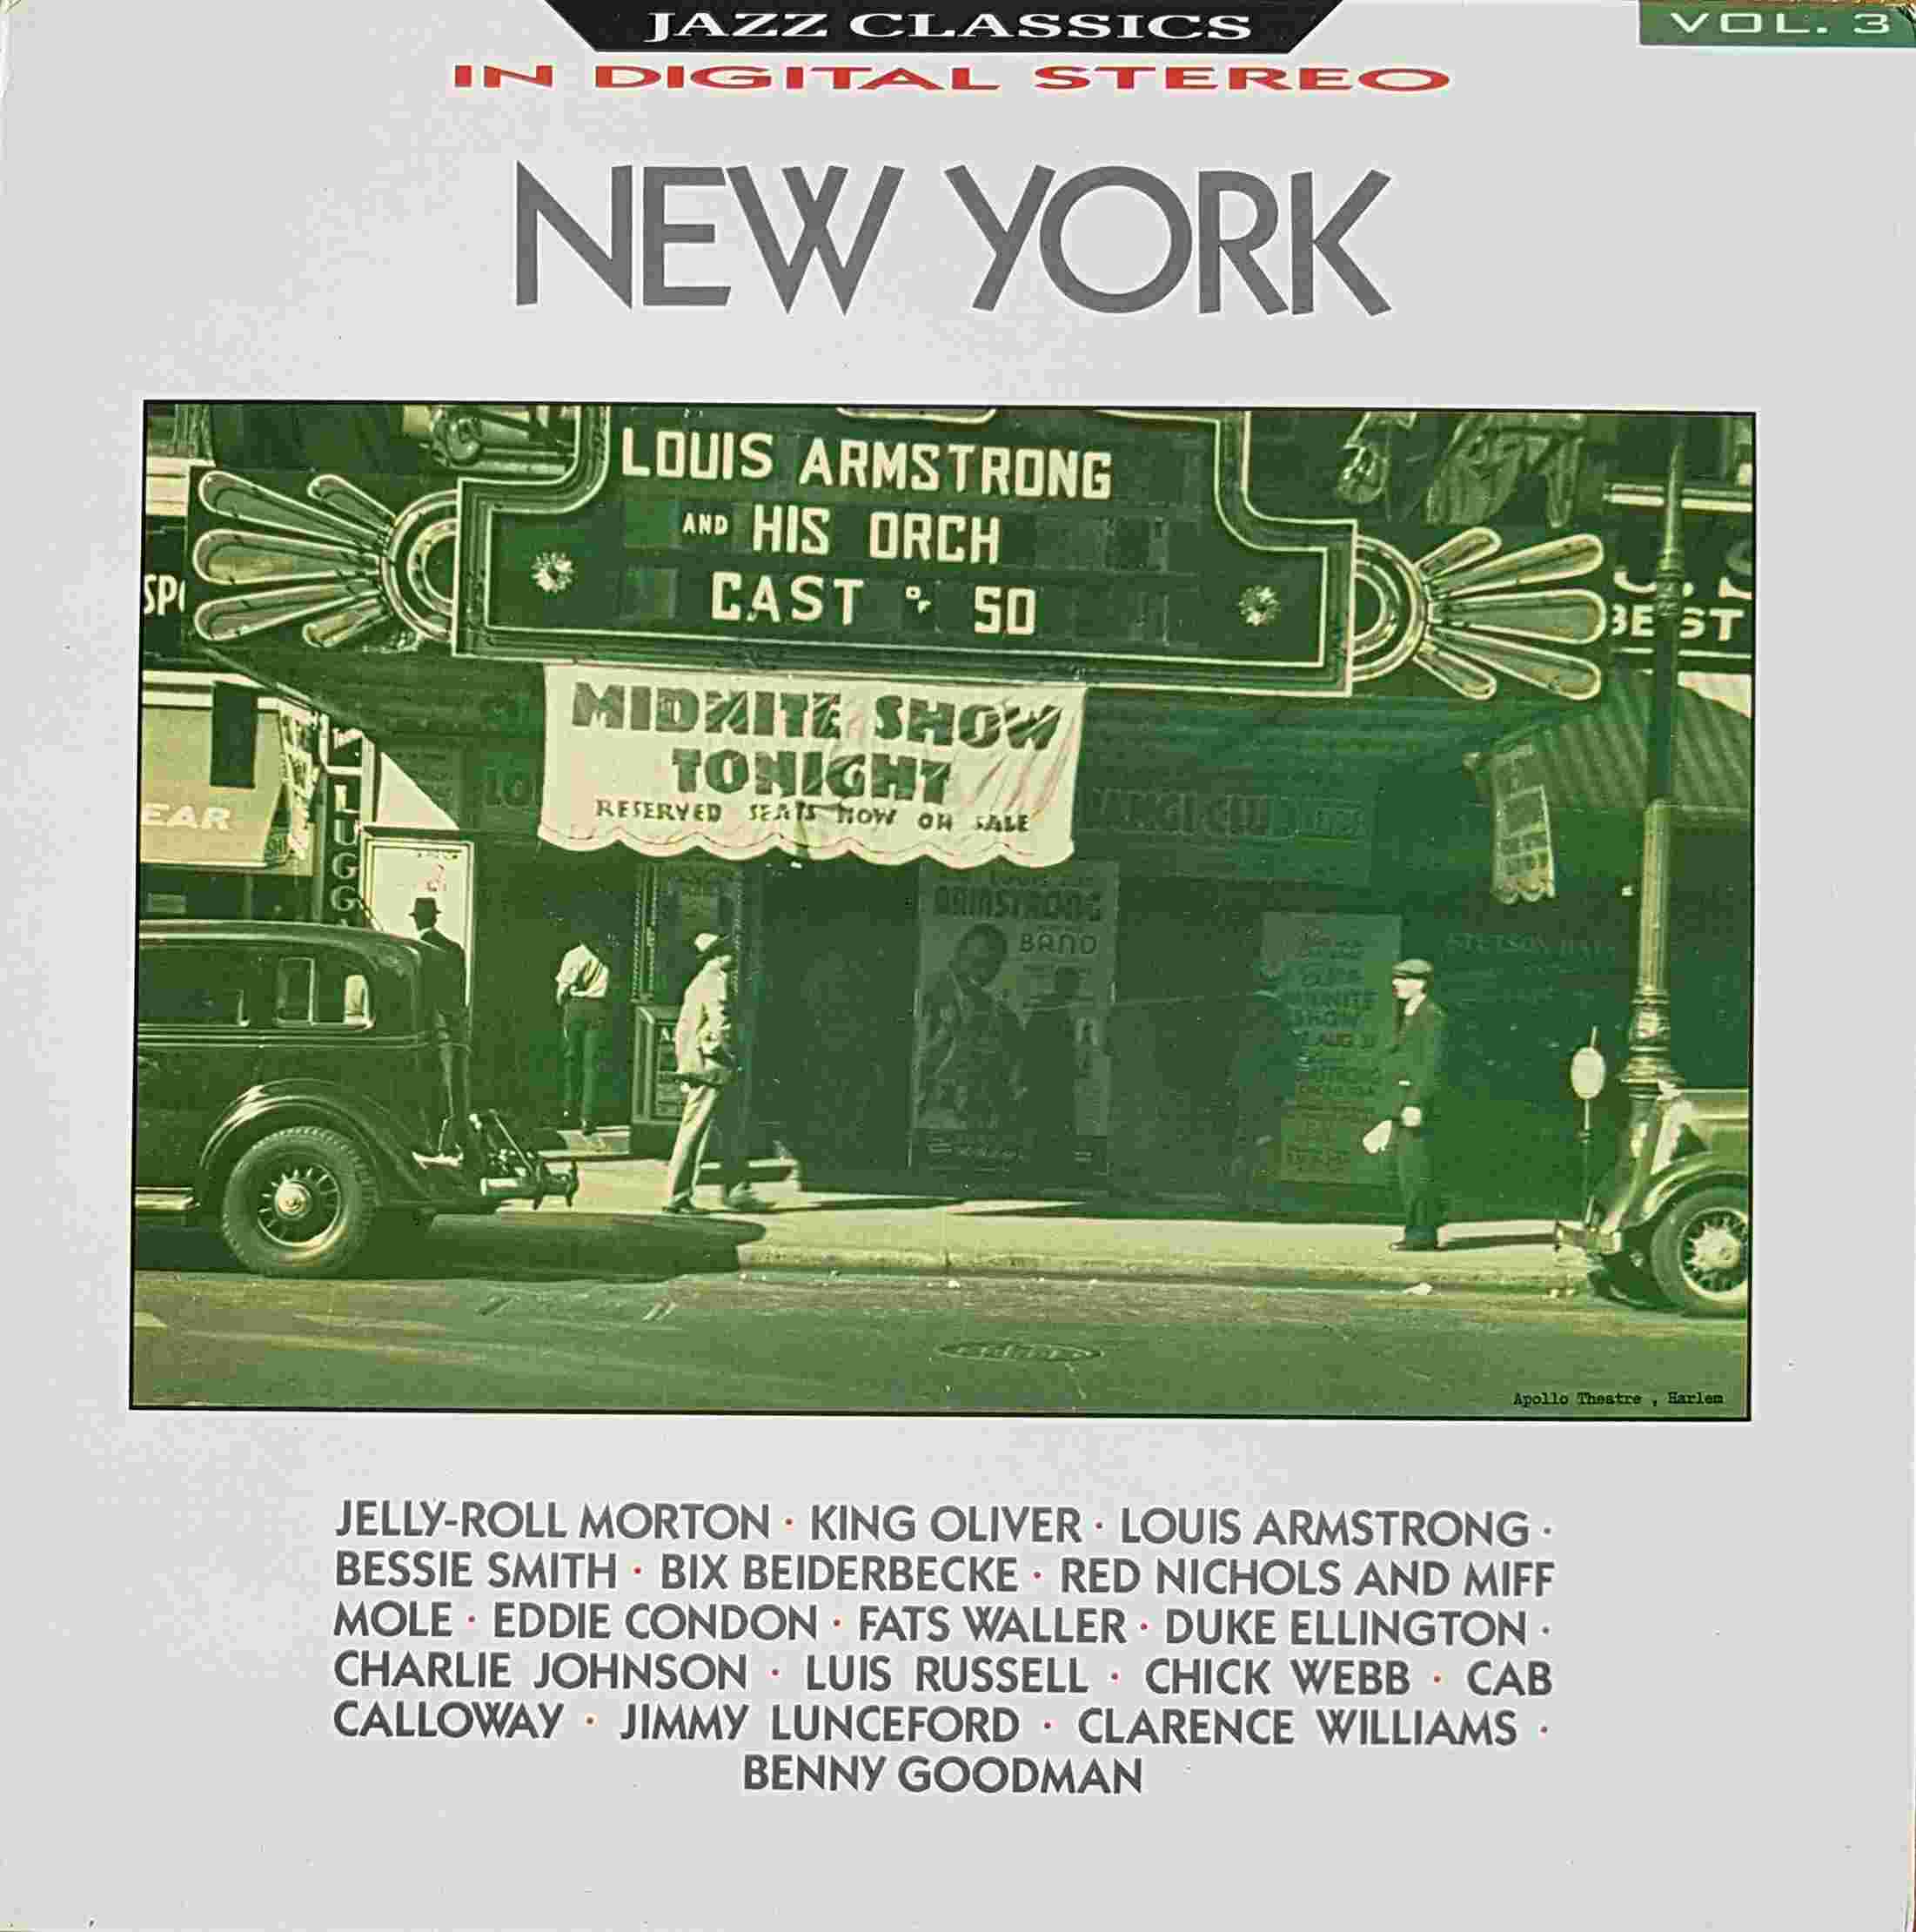 Picture of REB 590 Jazz Classics - Volume 3, New York by artist Various from the BBC albums - Records and Tapes library